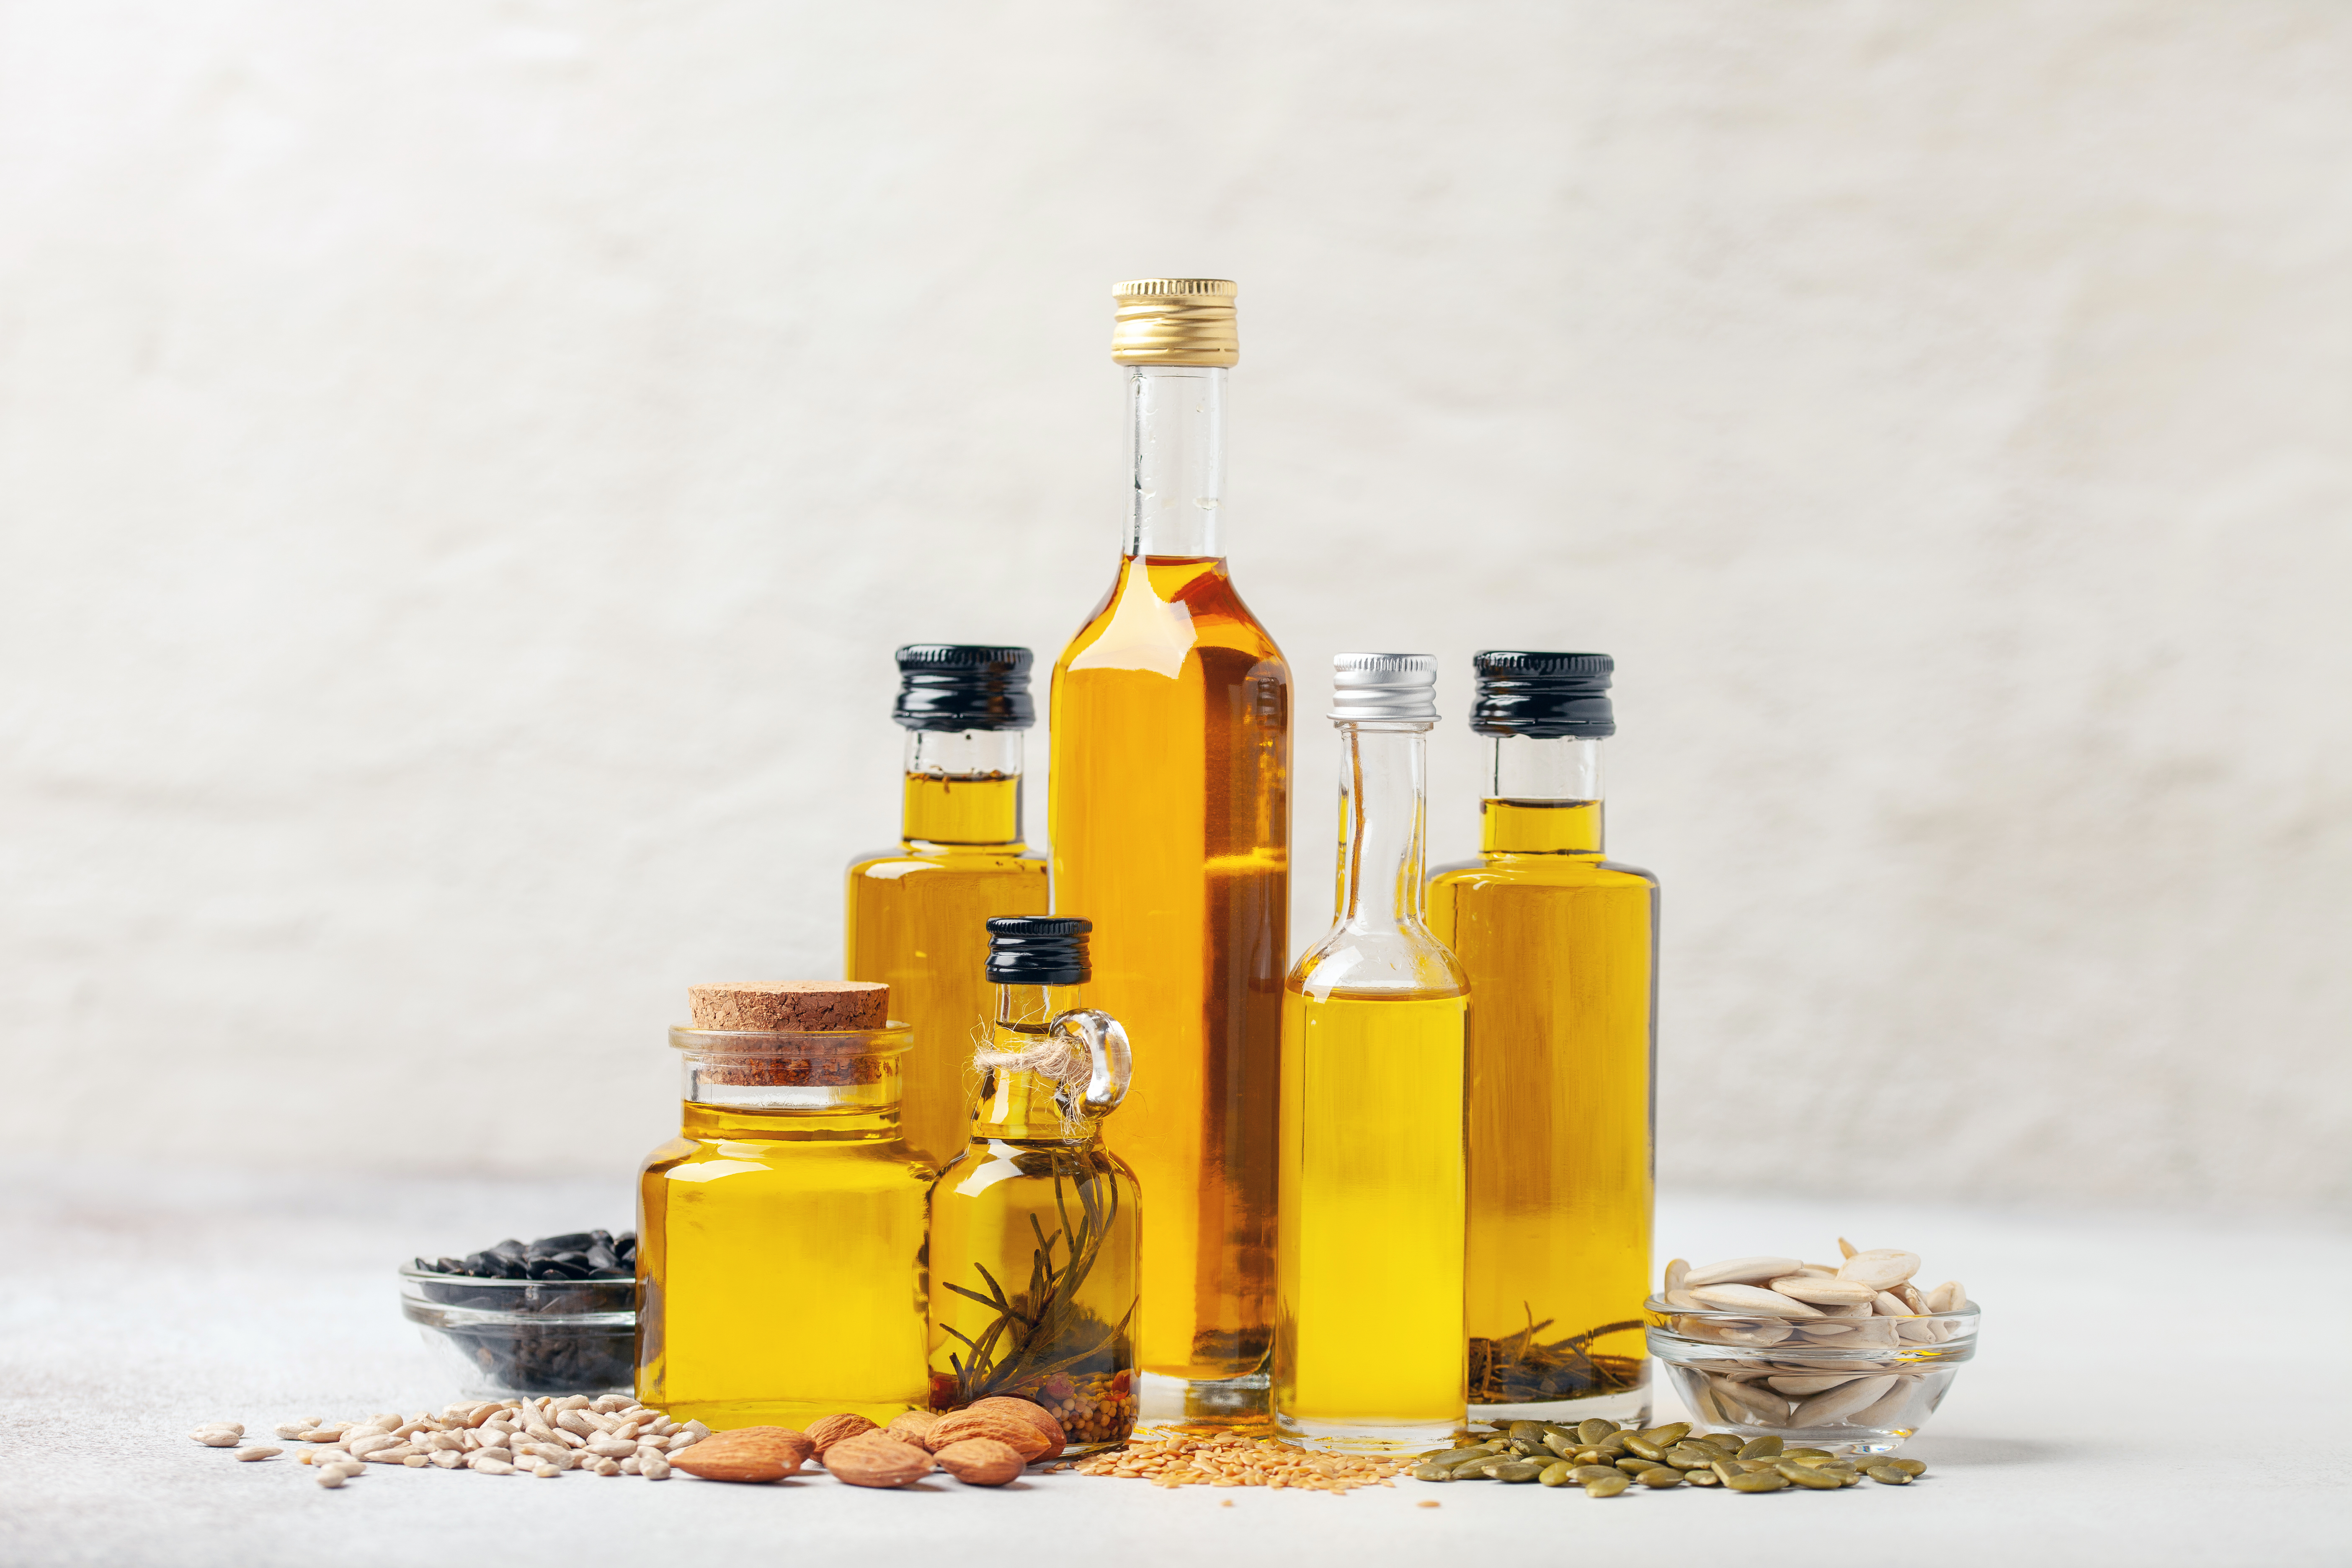 Oils in bottles for cooking